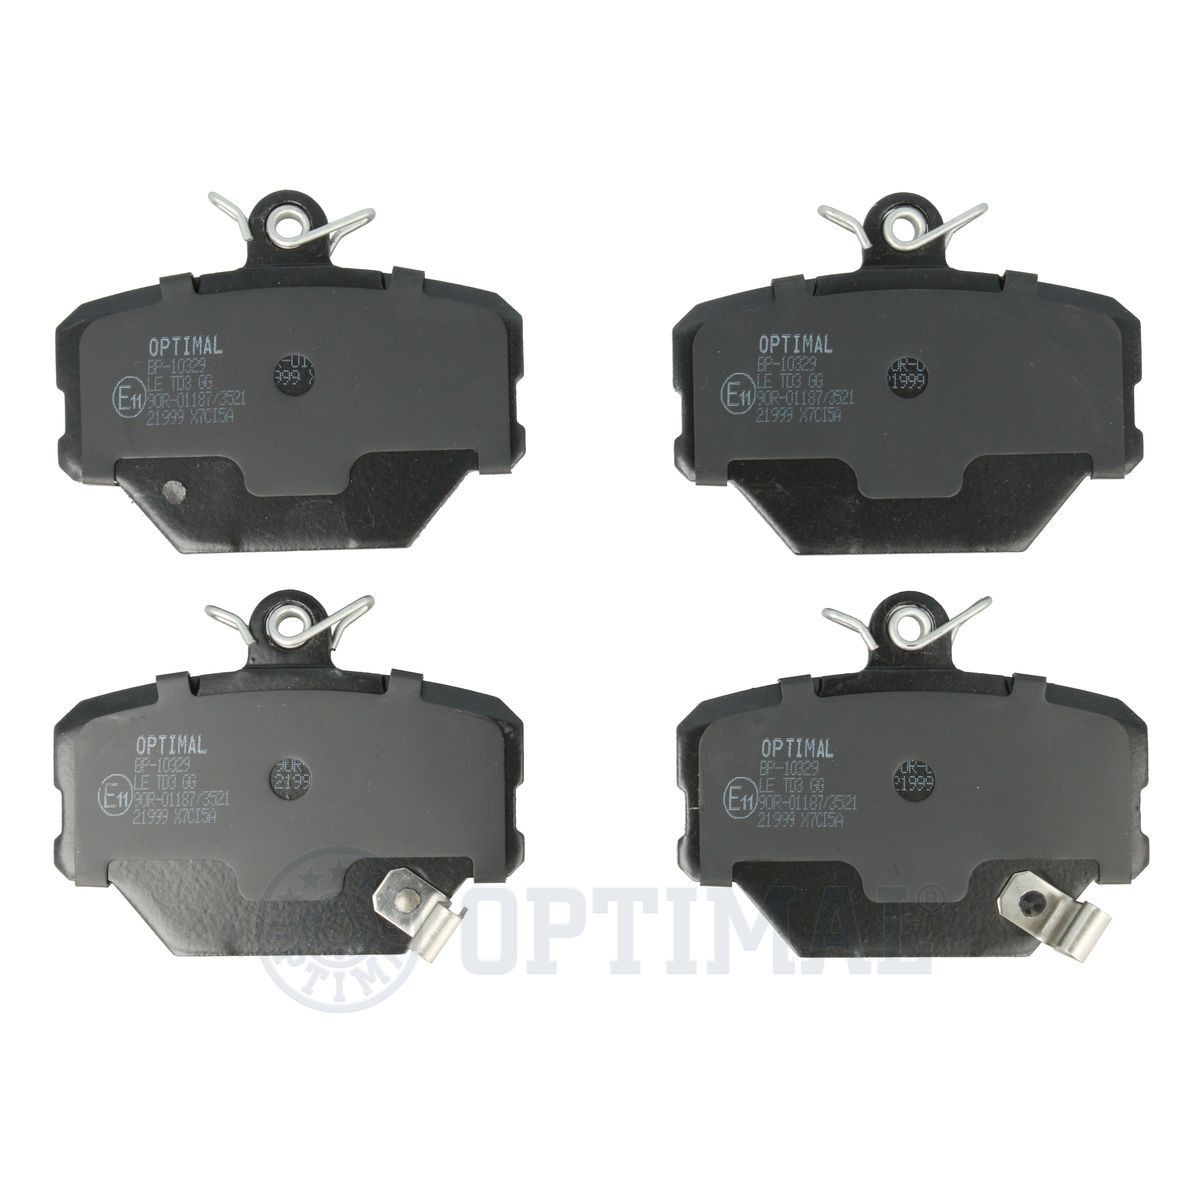 OPTIMAL BP-10329 Brake pad set Front Axle, with acoustic wear warning